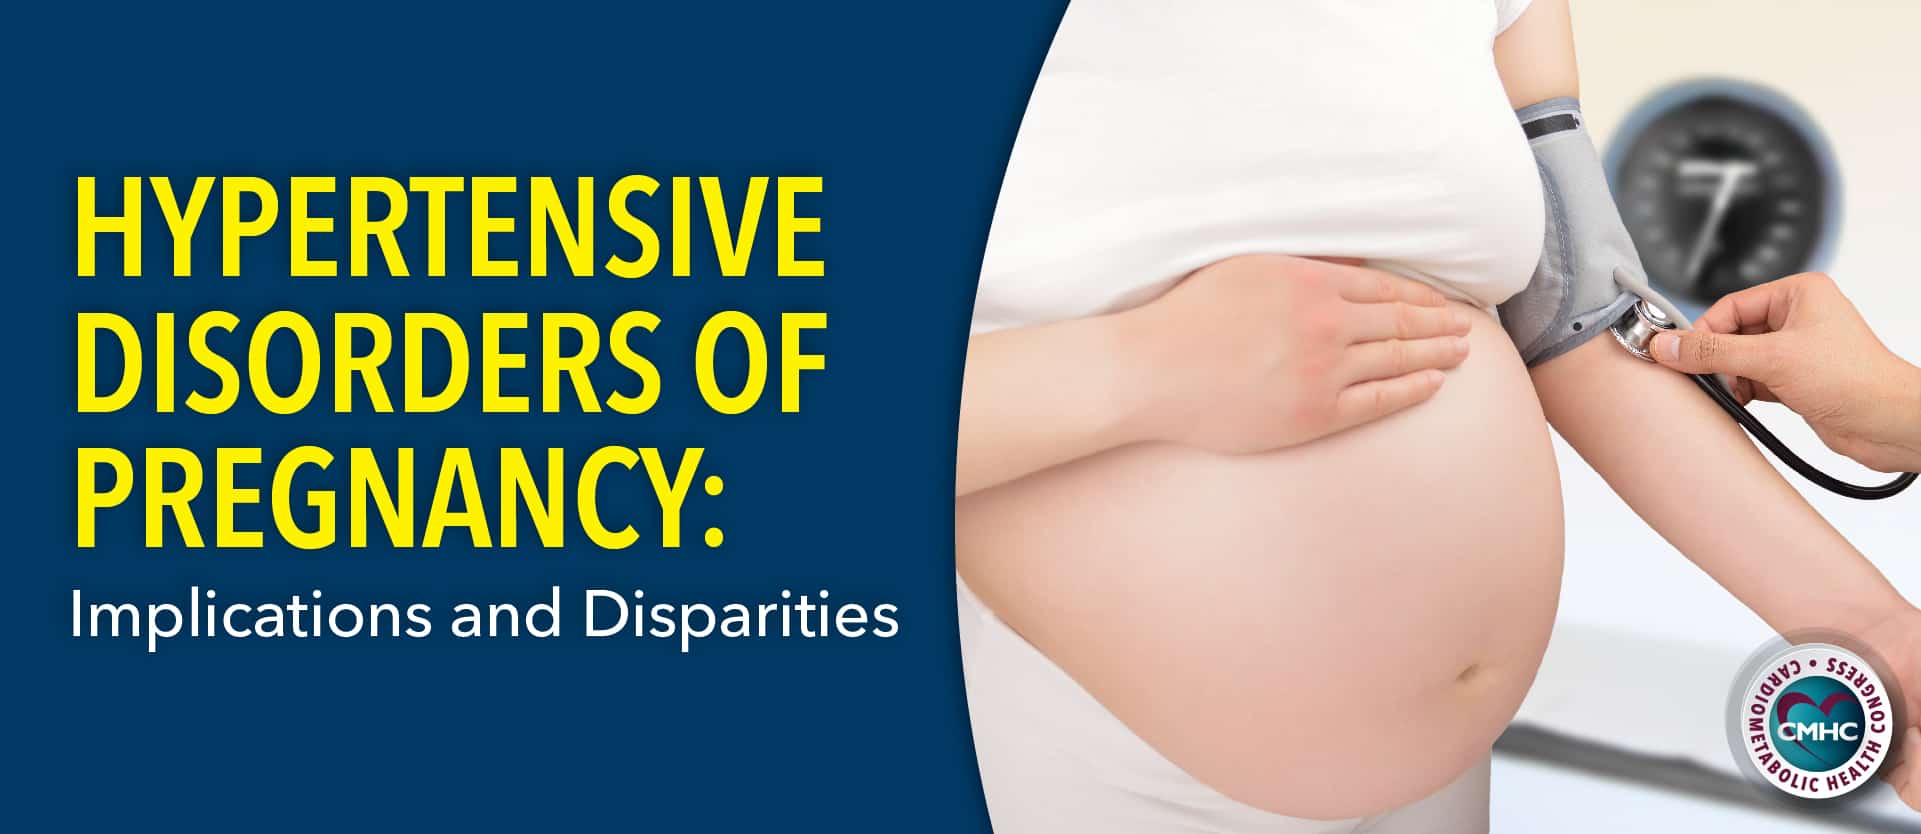 Hypertensive Disorders of Pregnancy: Implications and Disparities